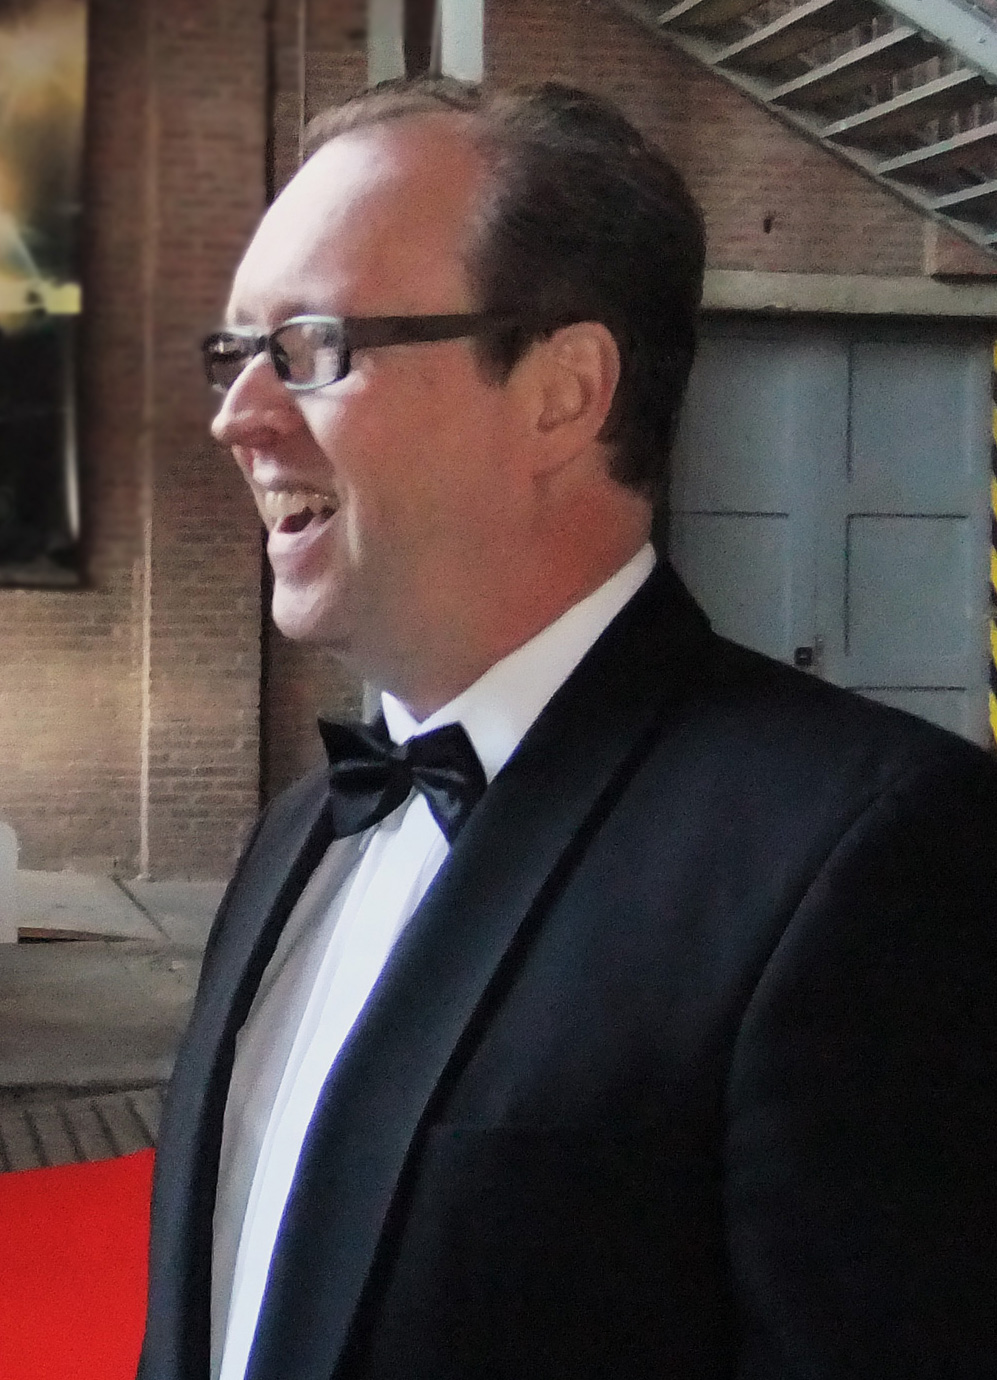 Martin Beek, director, at the premiere of Dutch feature film 